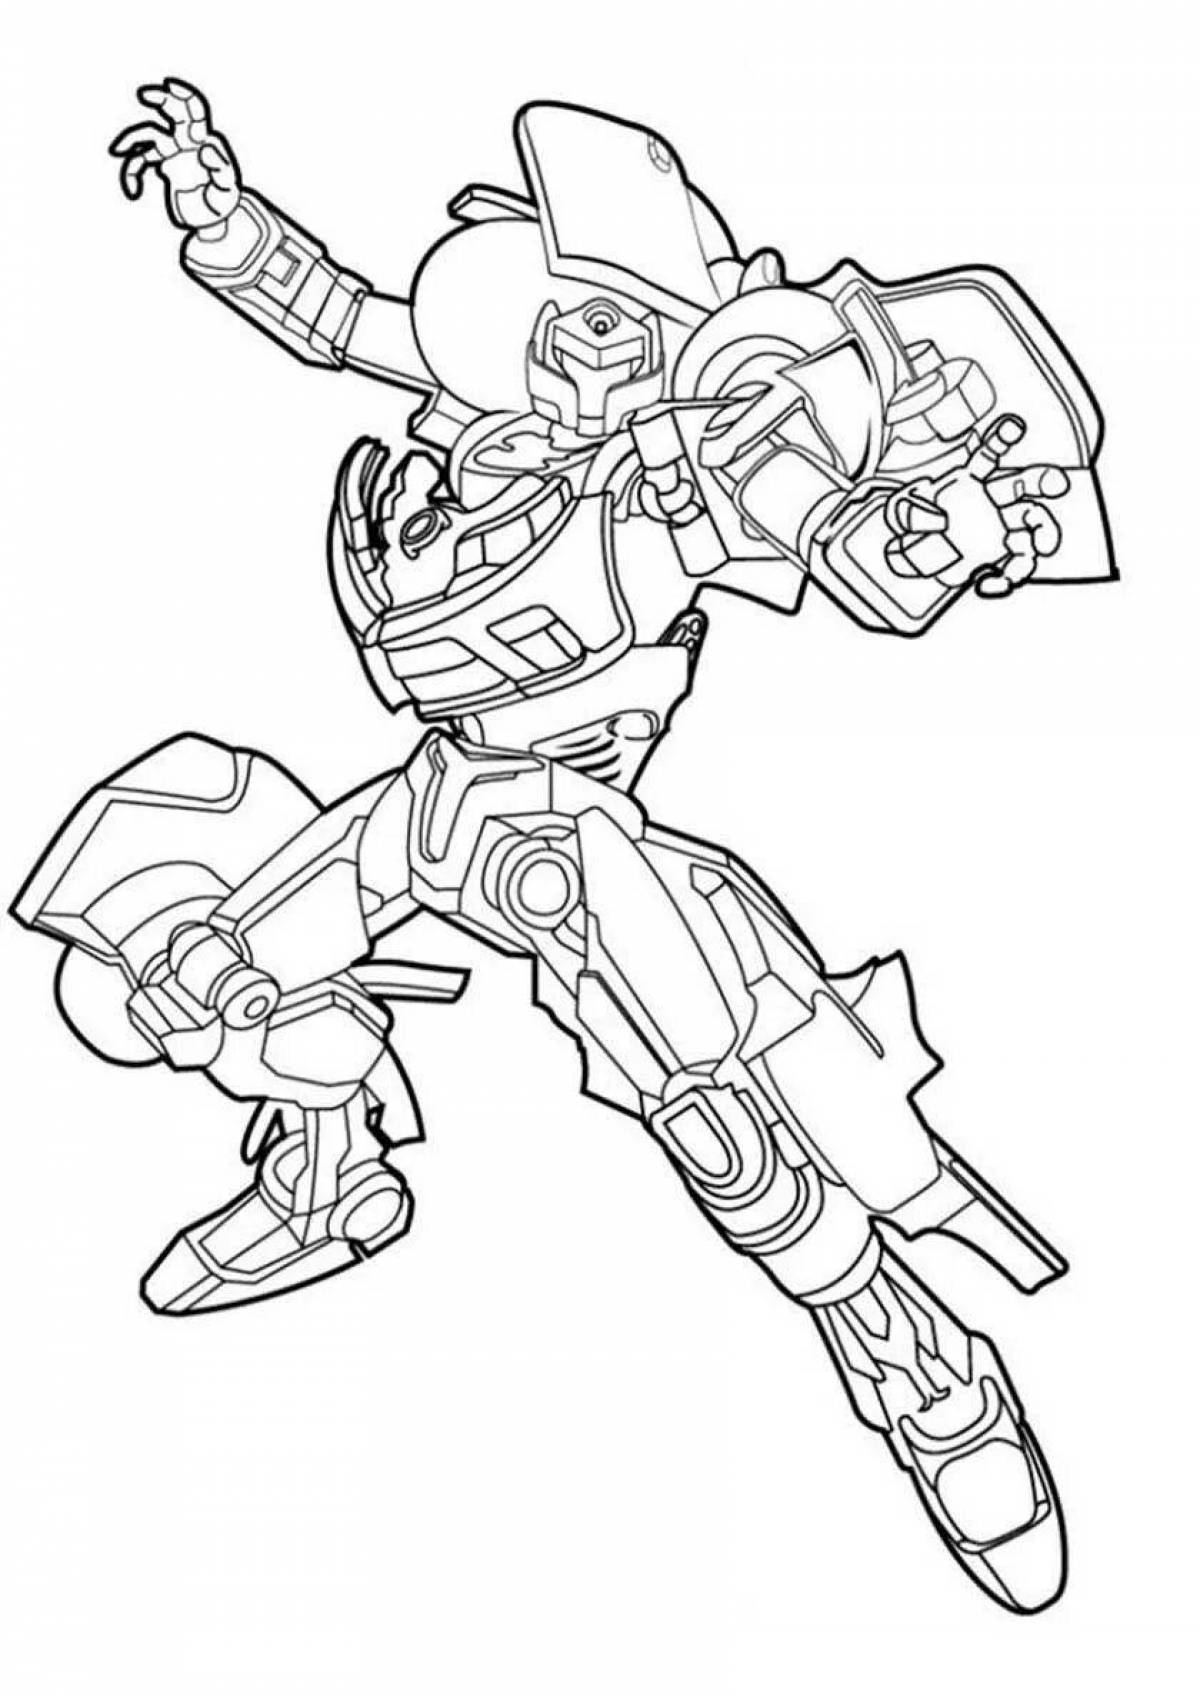 Фото Color-explosive tobot x coloring page